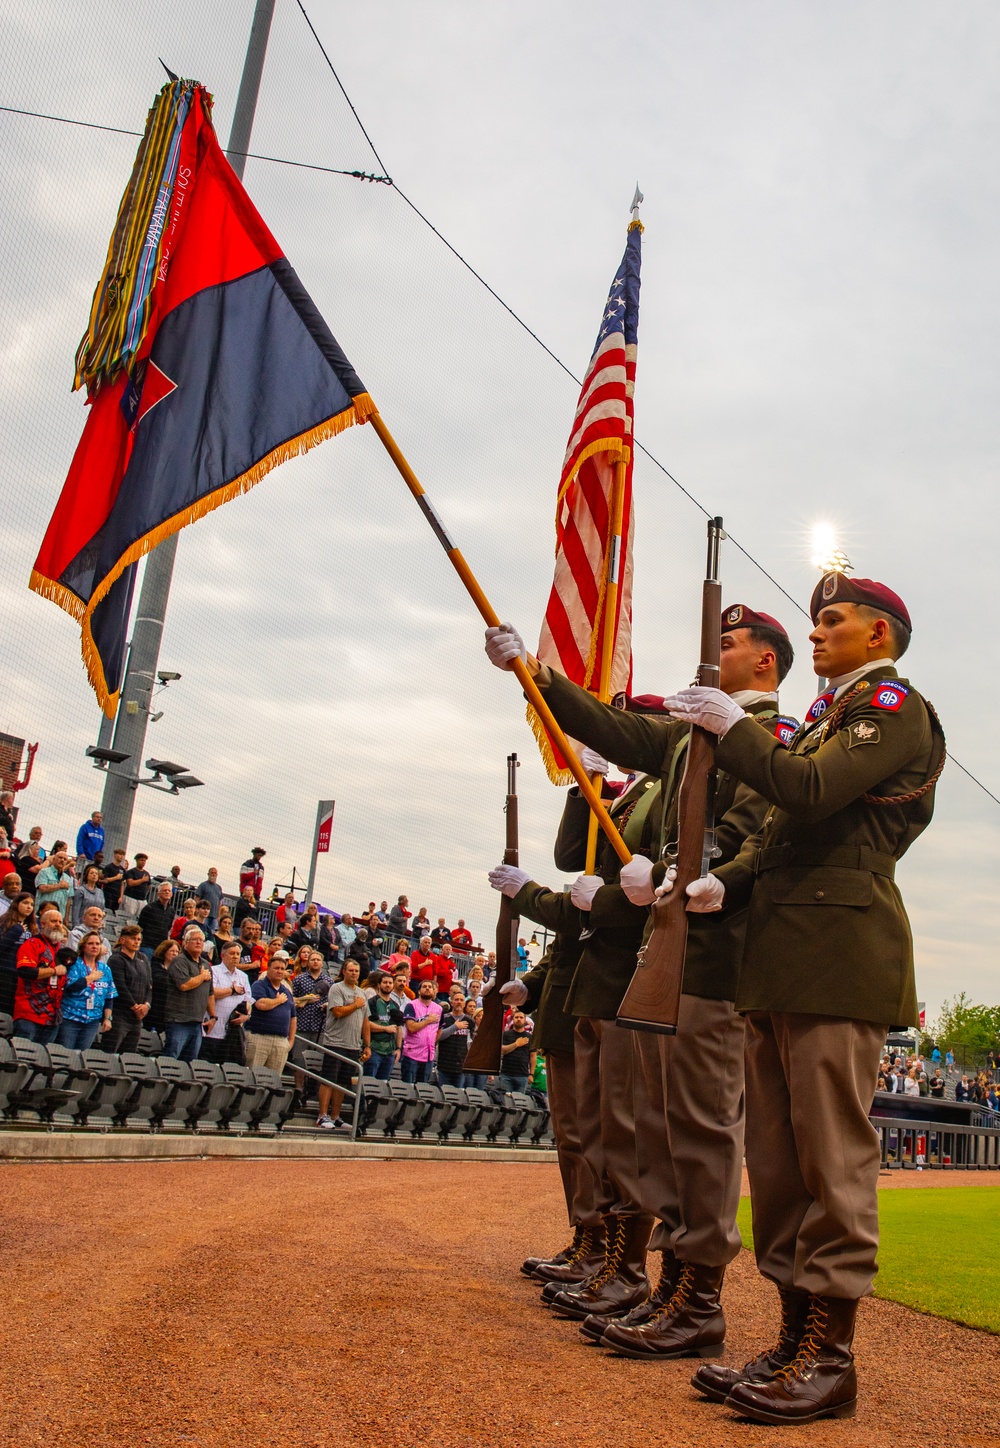 82nd ABN DIV Chorus and Color Guard perform at Segra Stadium